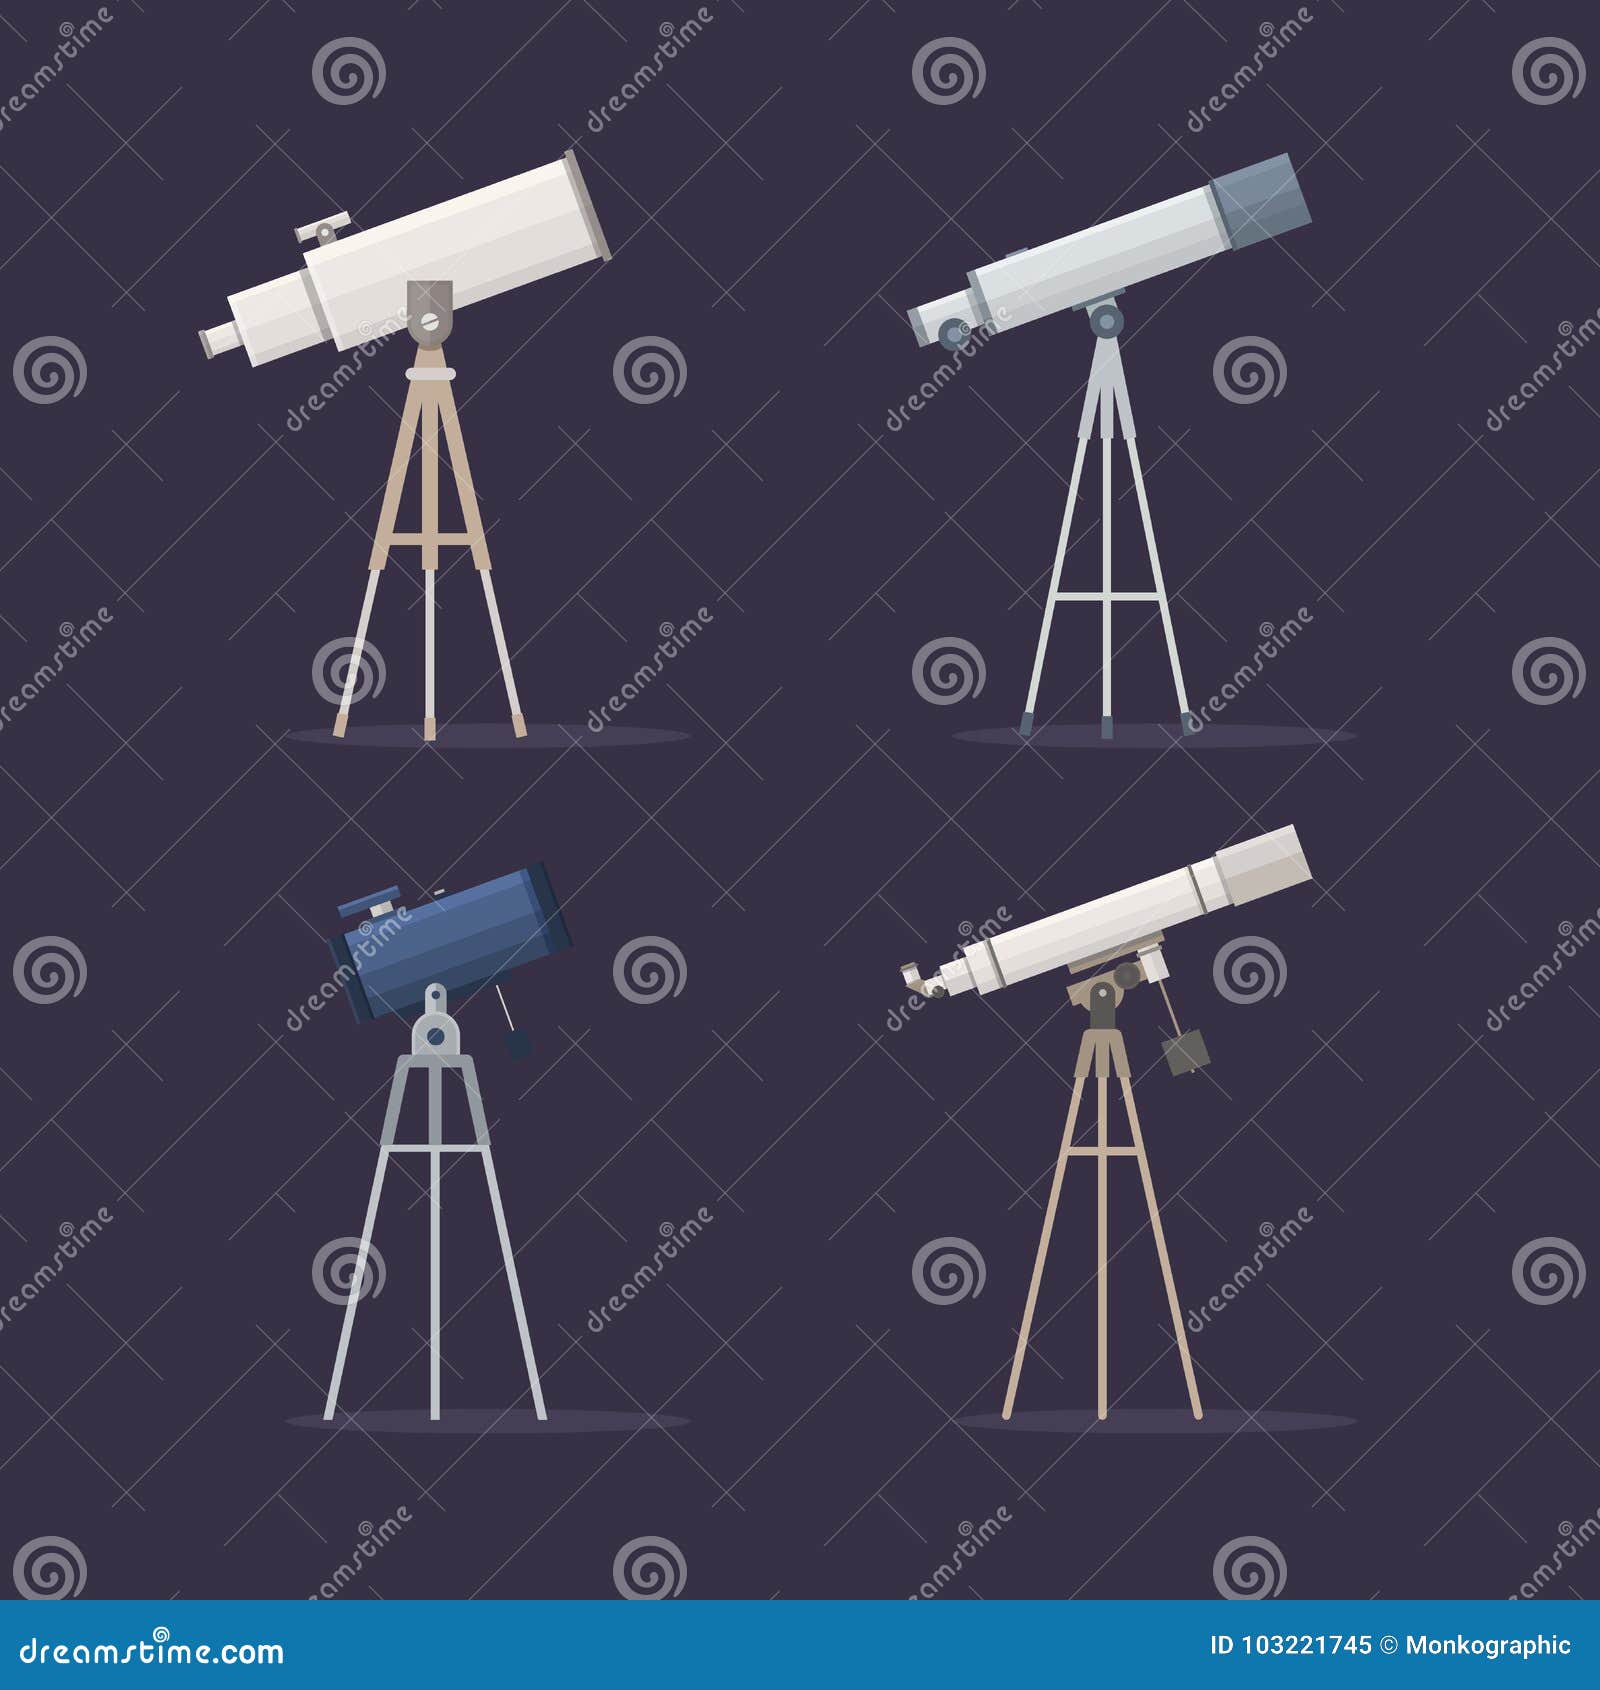 set telescopes on support to observe stars.